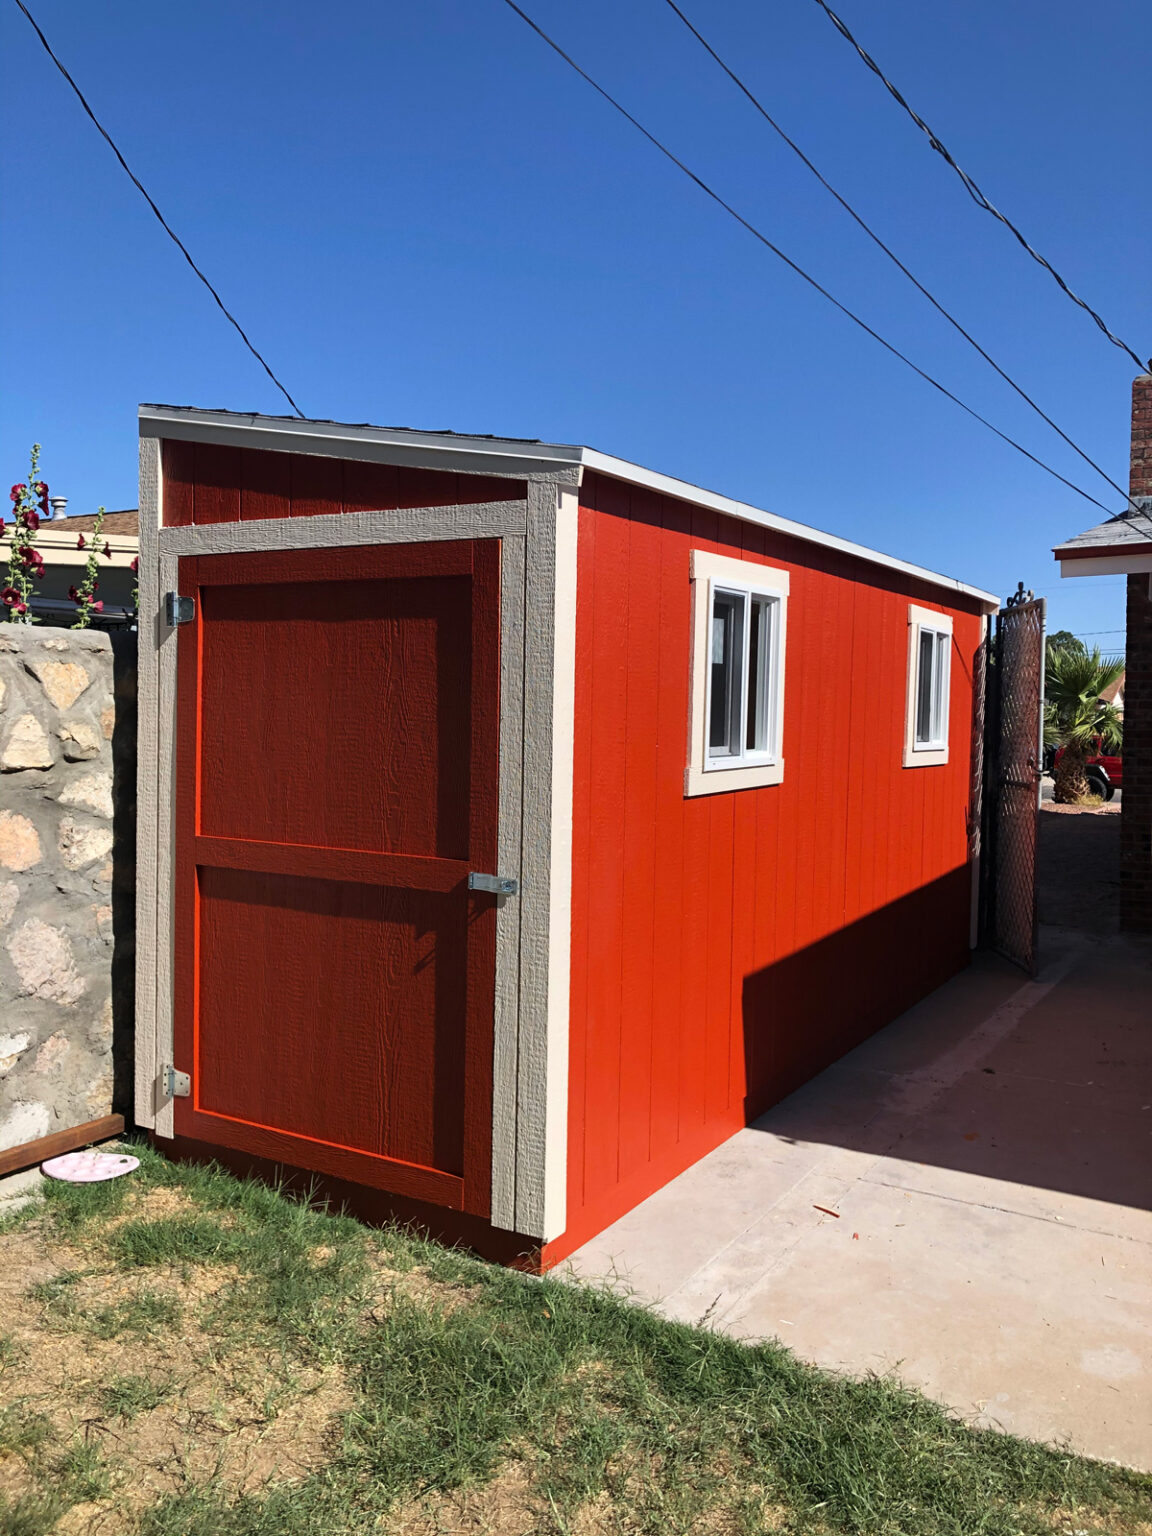 A red lean-to shed in an El Paso yard.